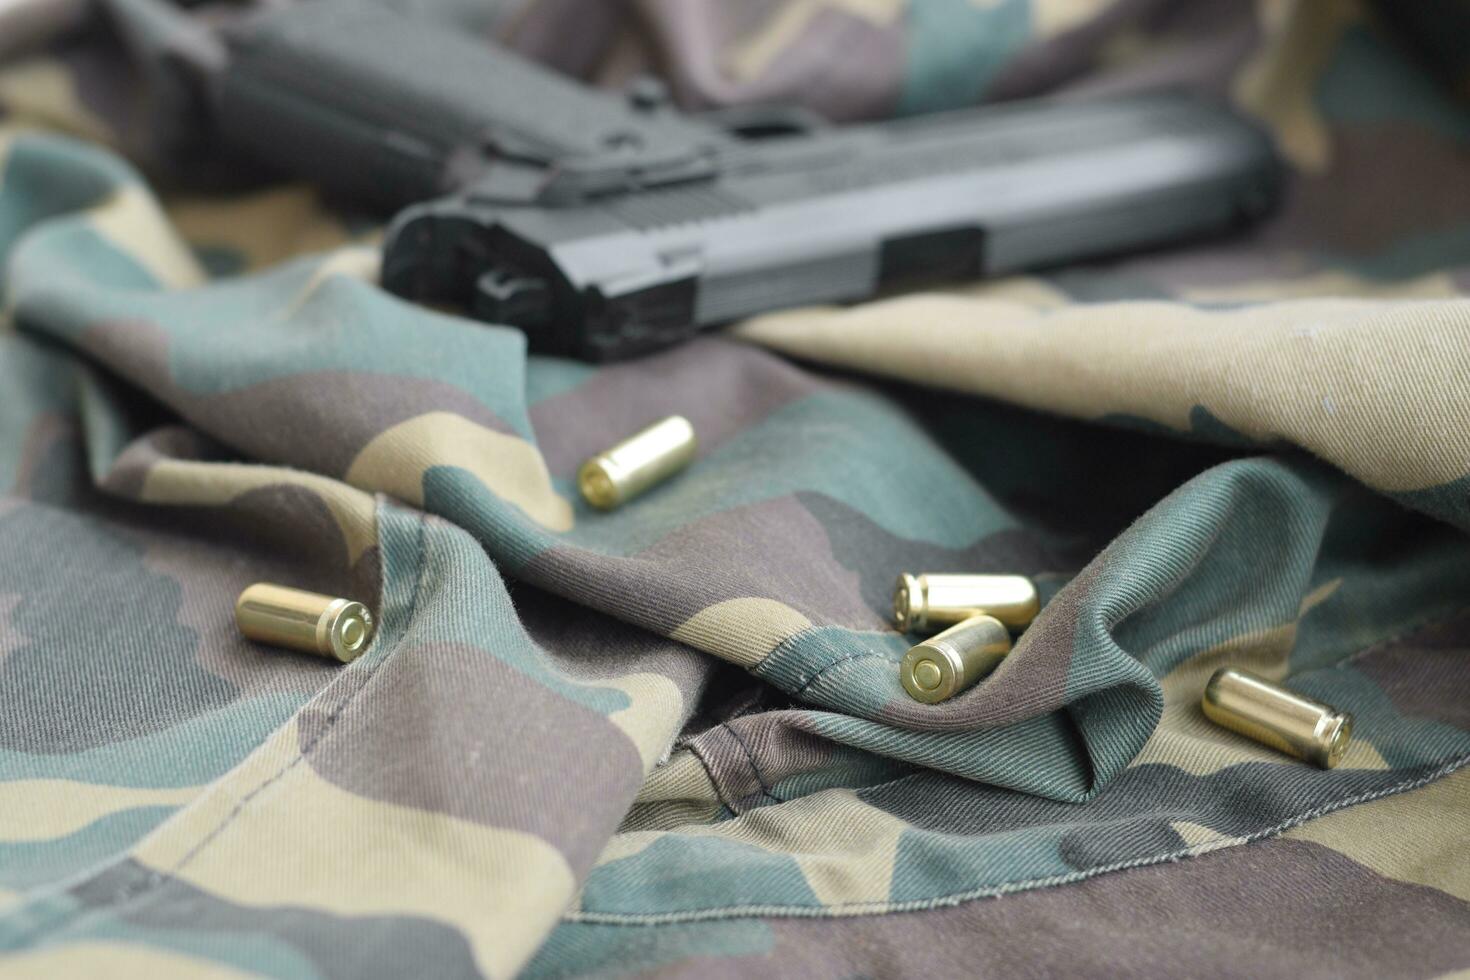 9mm bullets and pistol lie on folded camouflage green fabric. A set shooting range items or a self-defense kit photo